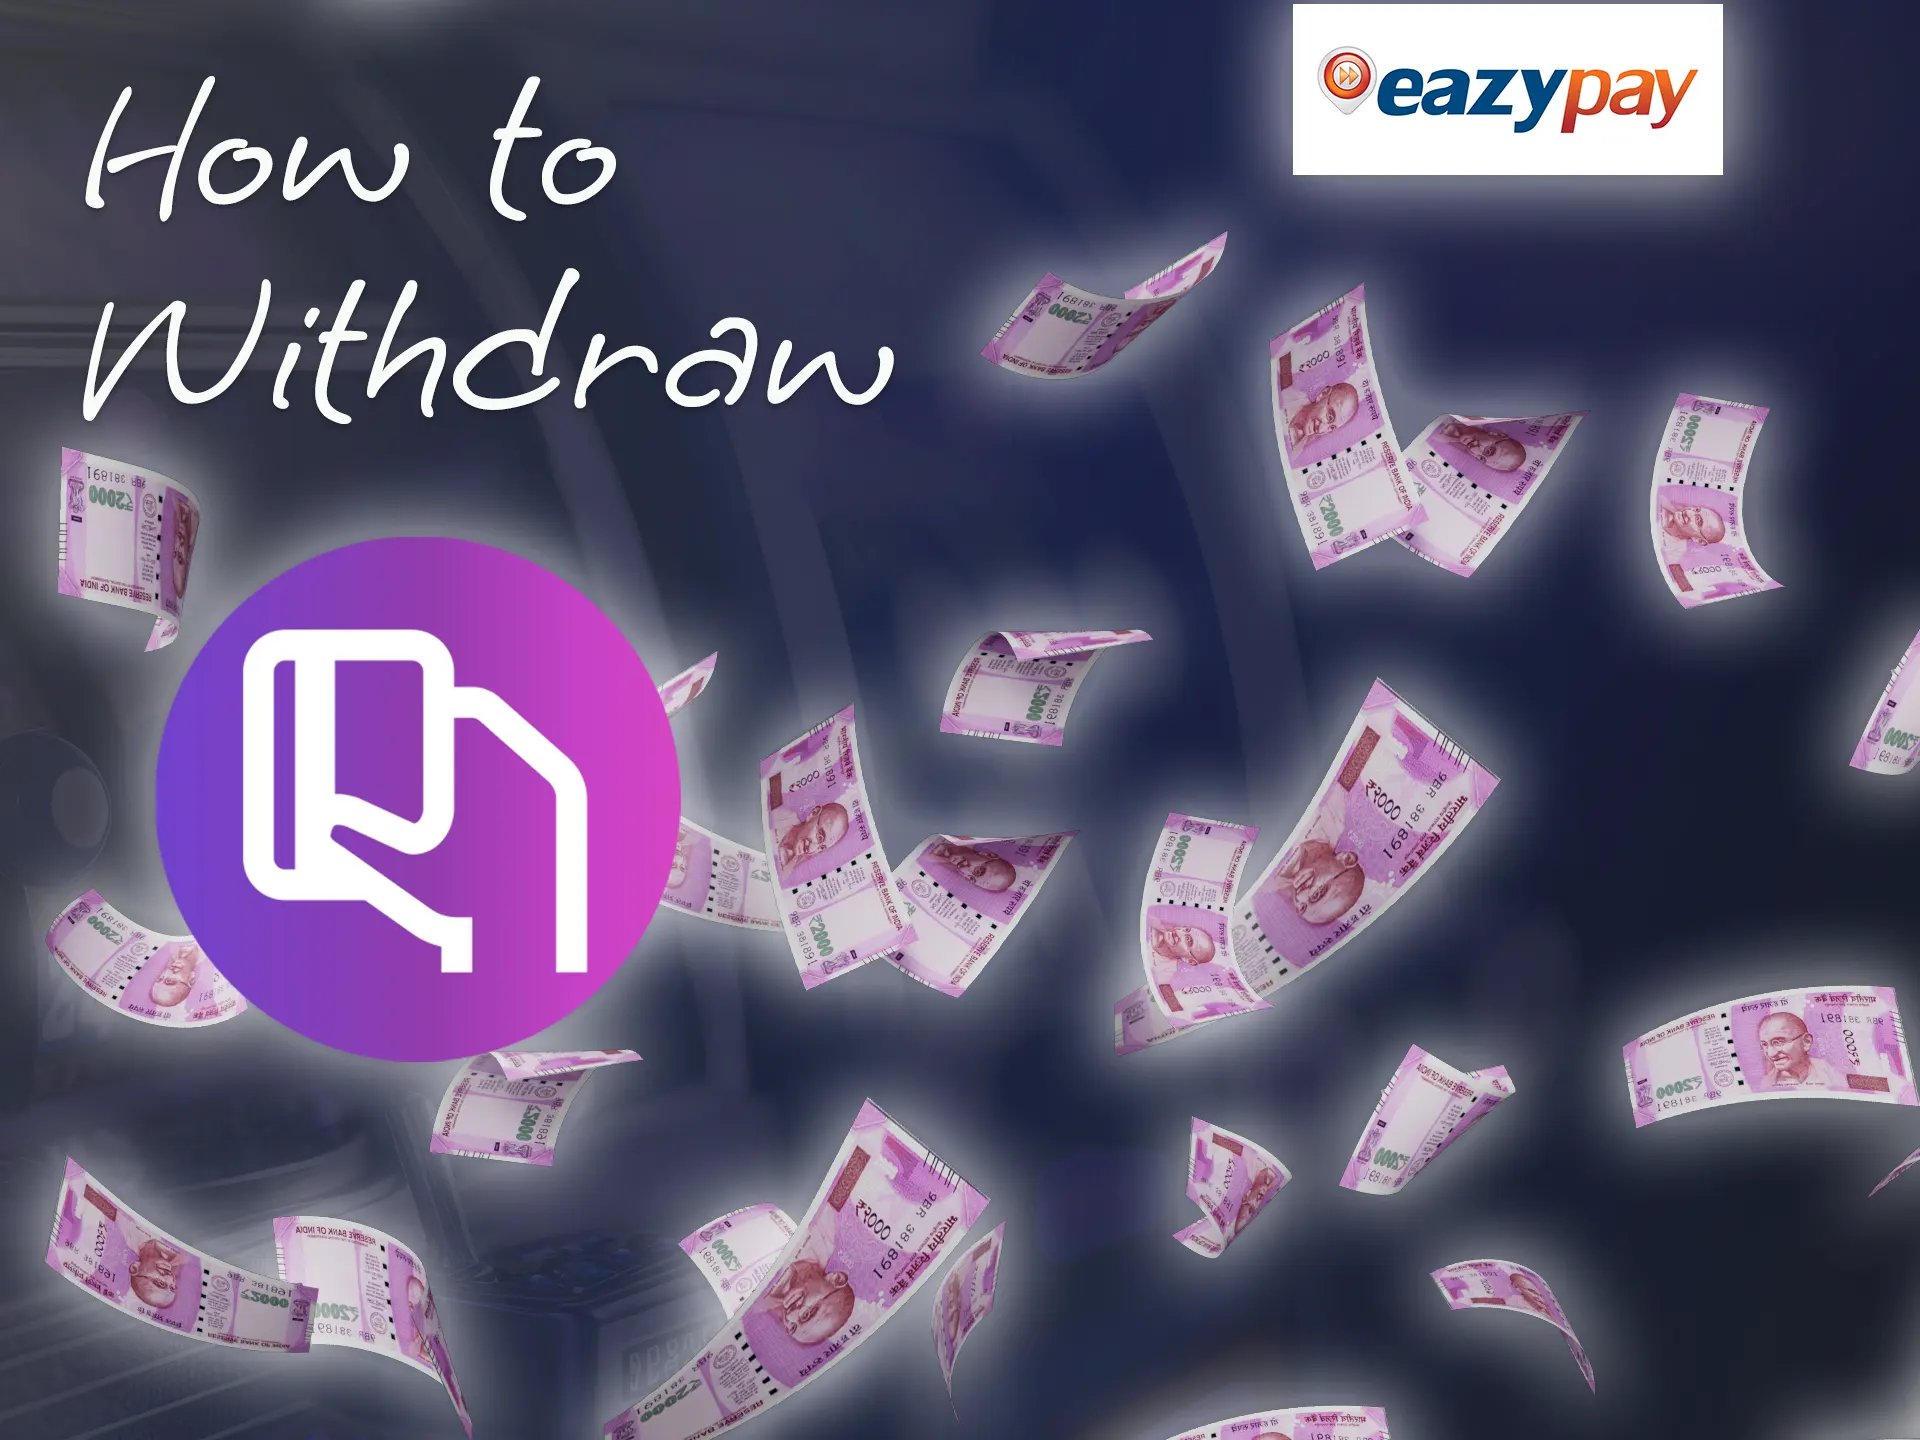 Withdraw money from your gaming account using the EazyPay payment system.